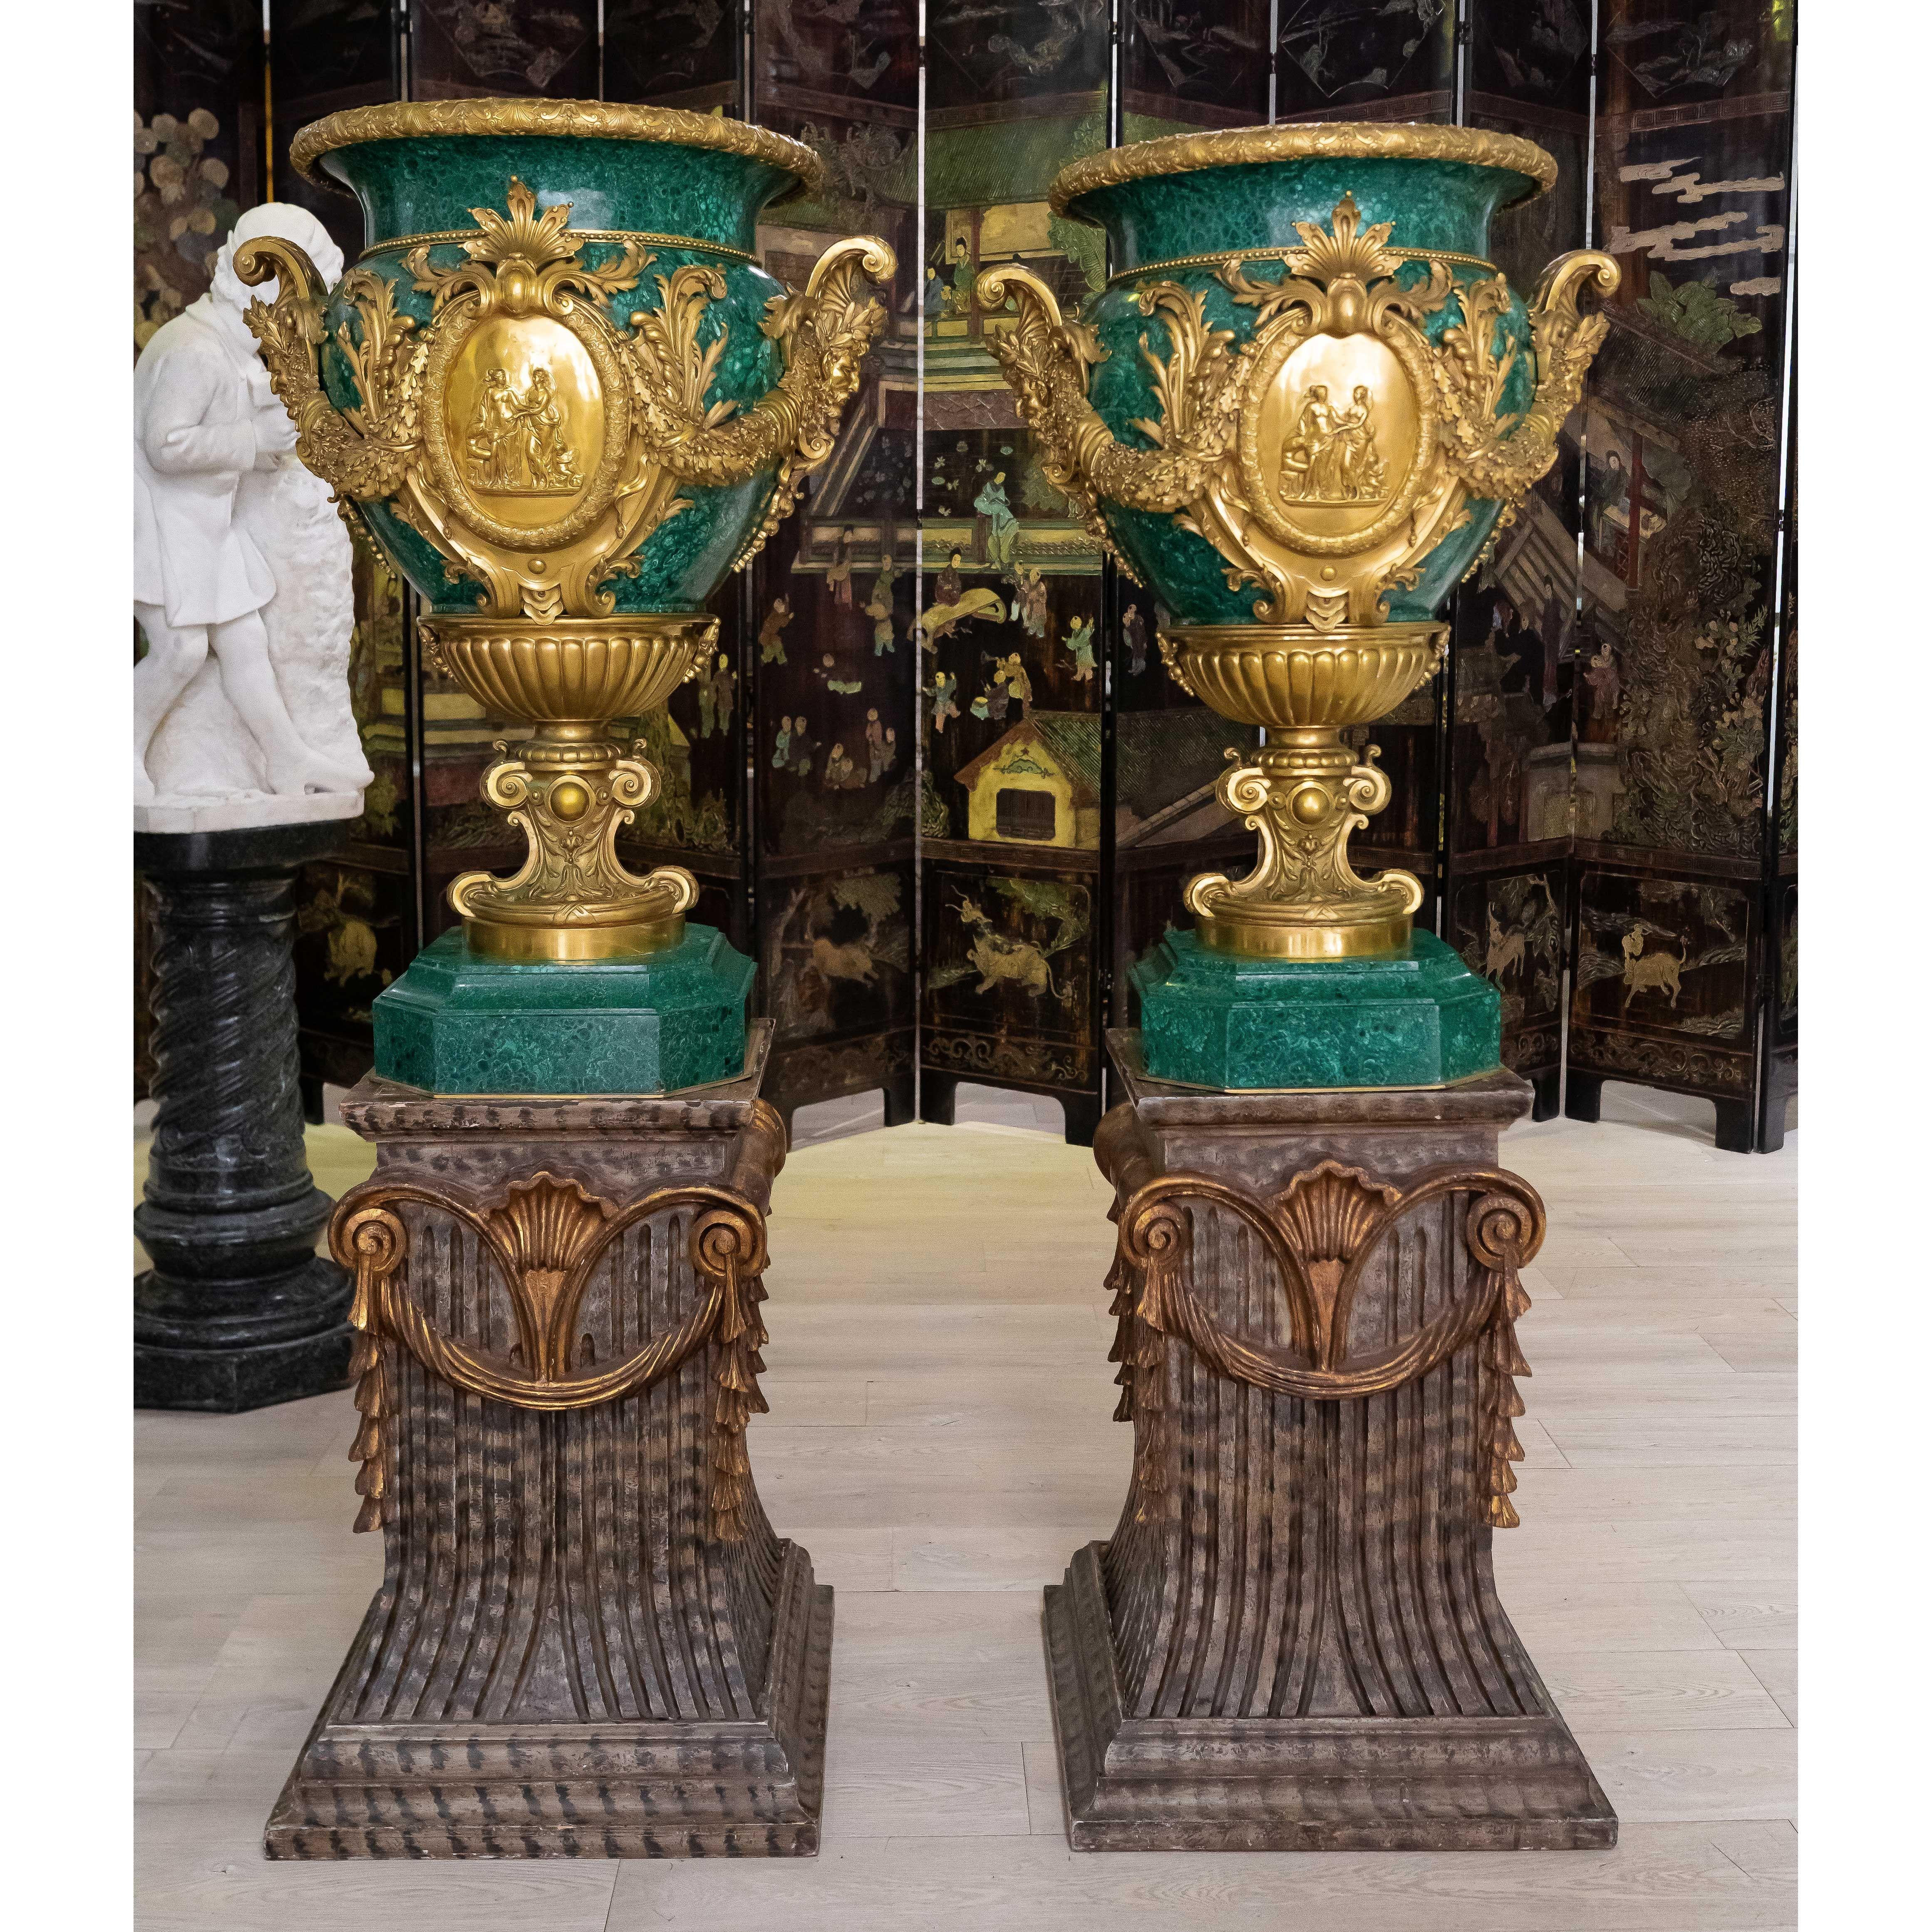 Pair of Monumental Gilt Bronze-Mounted Malachite Urns For Sale 6